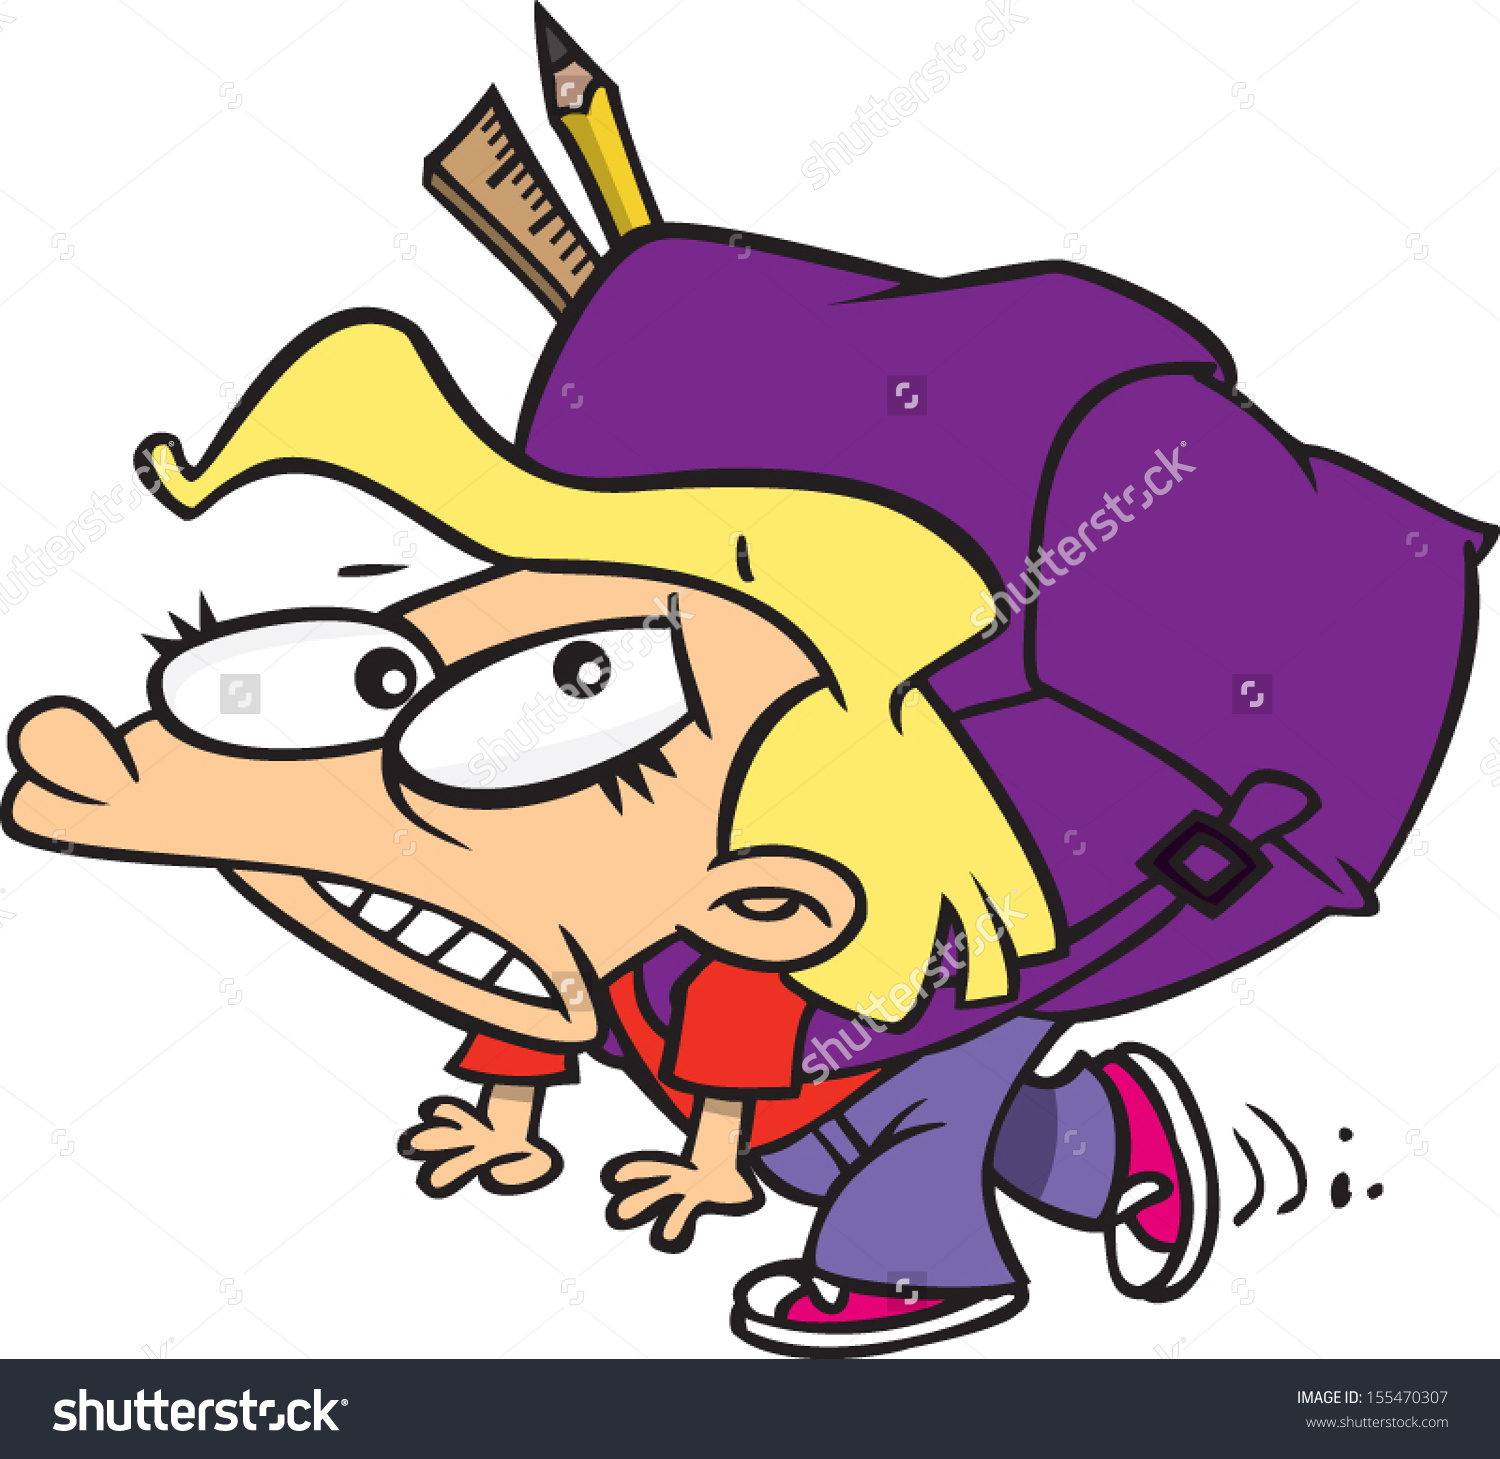 Heavy backpack clipart.